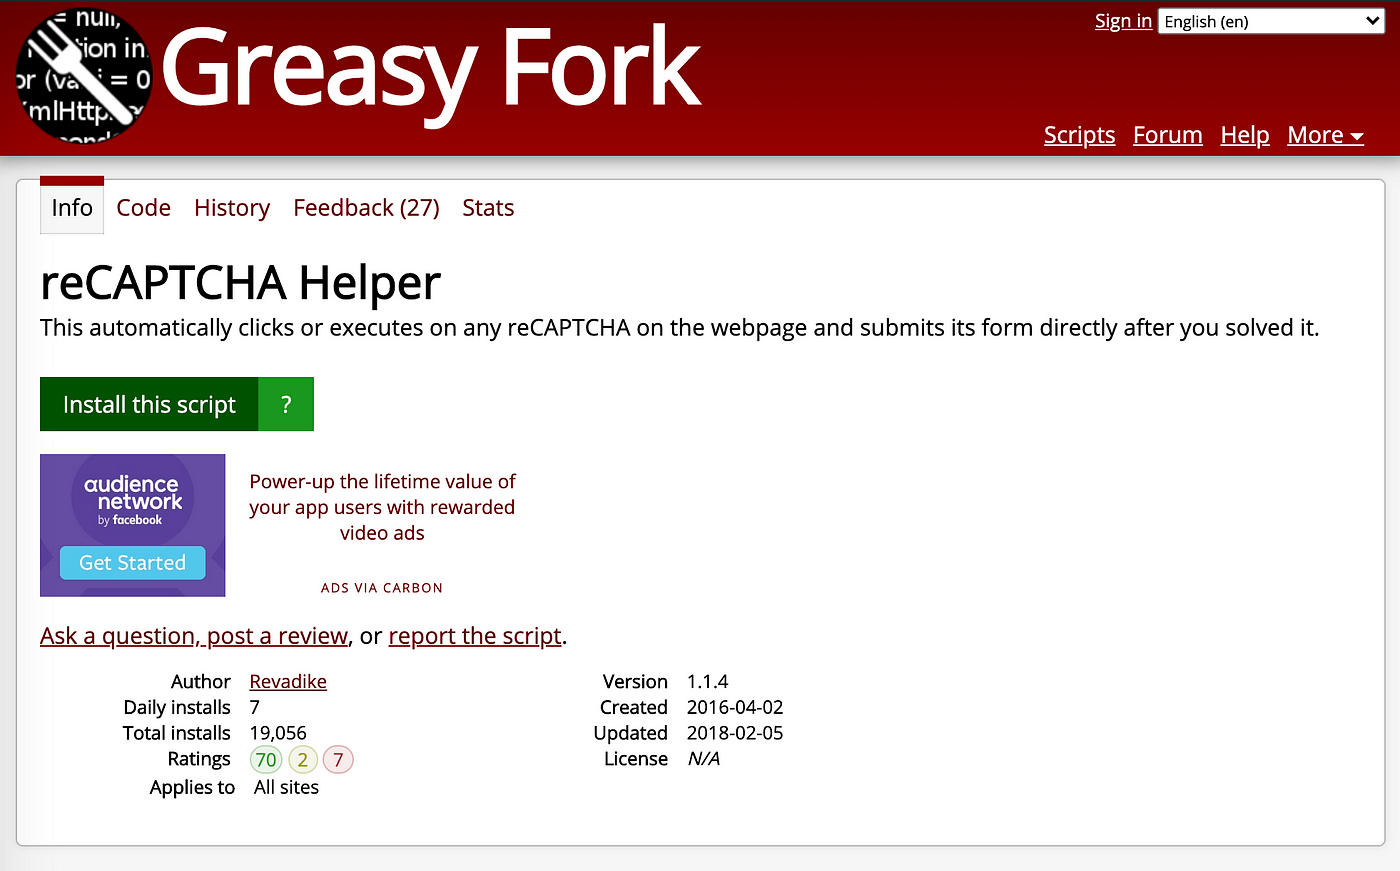 Cannot access Greasy Fork scripts